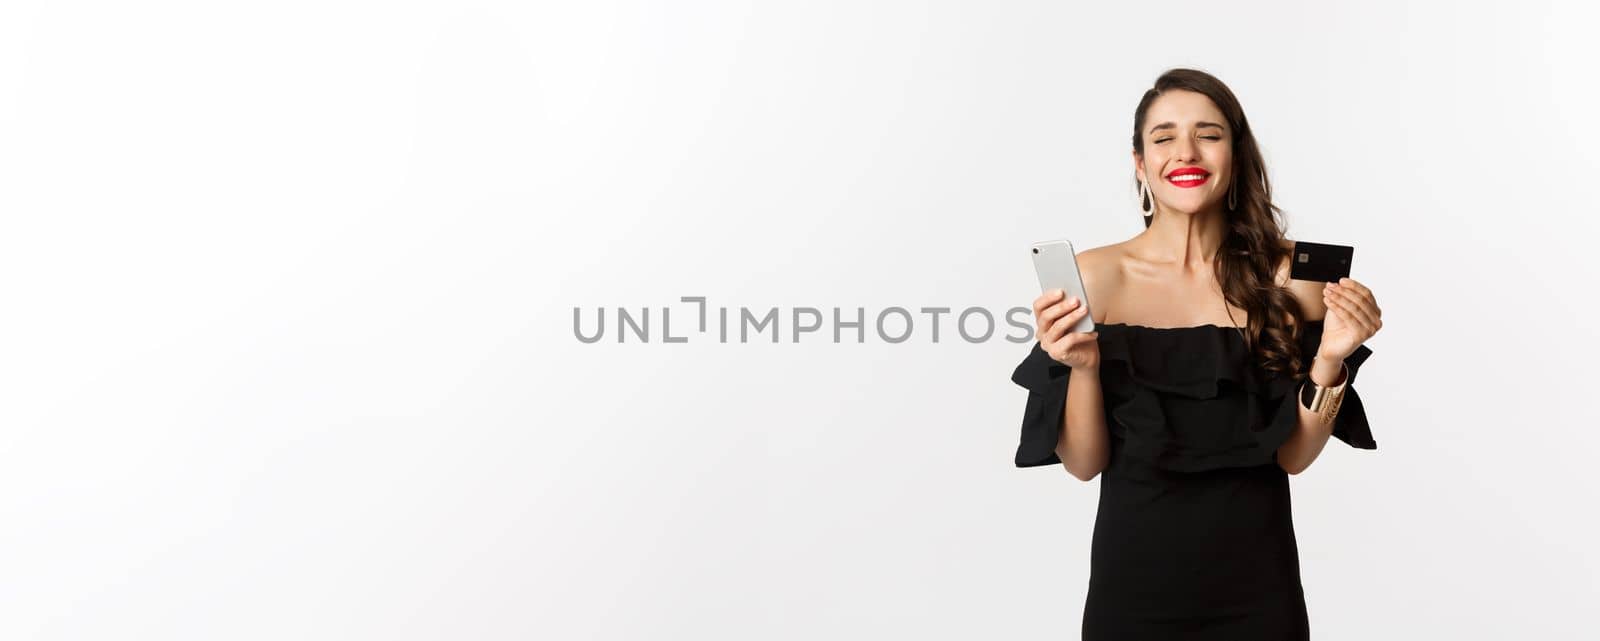 Online shopping concept. Fashionable woman in black dress, holding credit card with smartphone, looking satisfied, standing over white background.